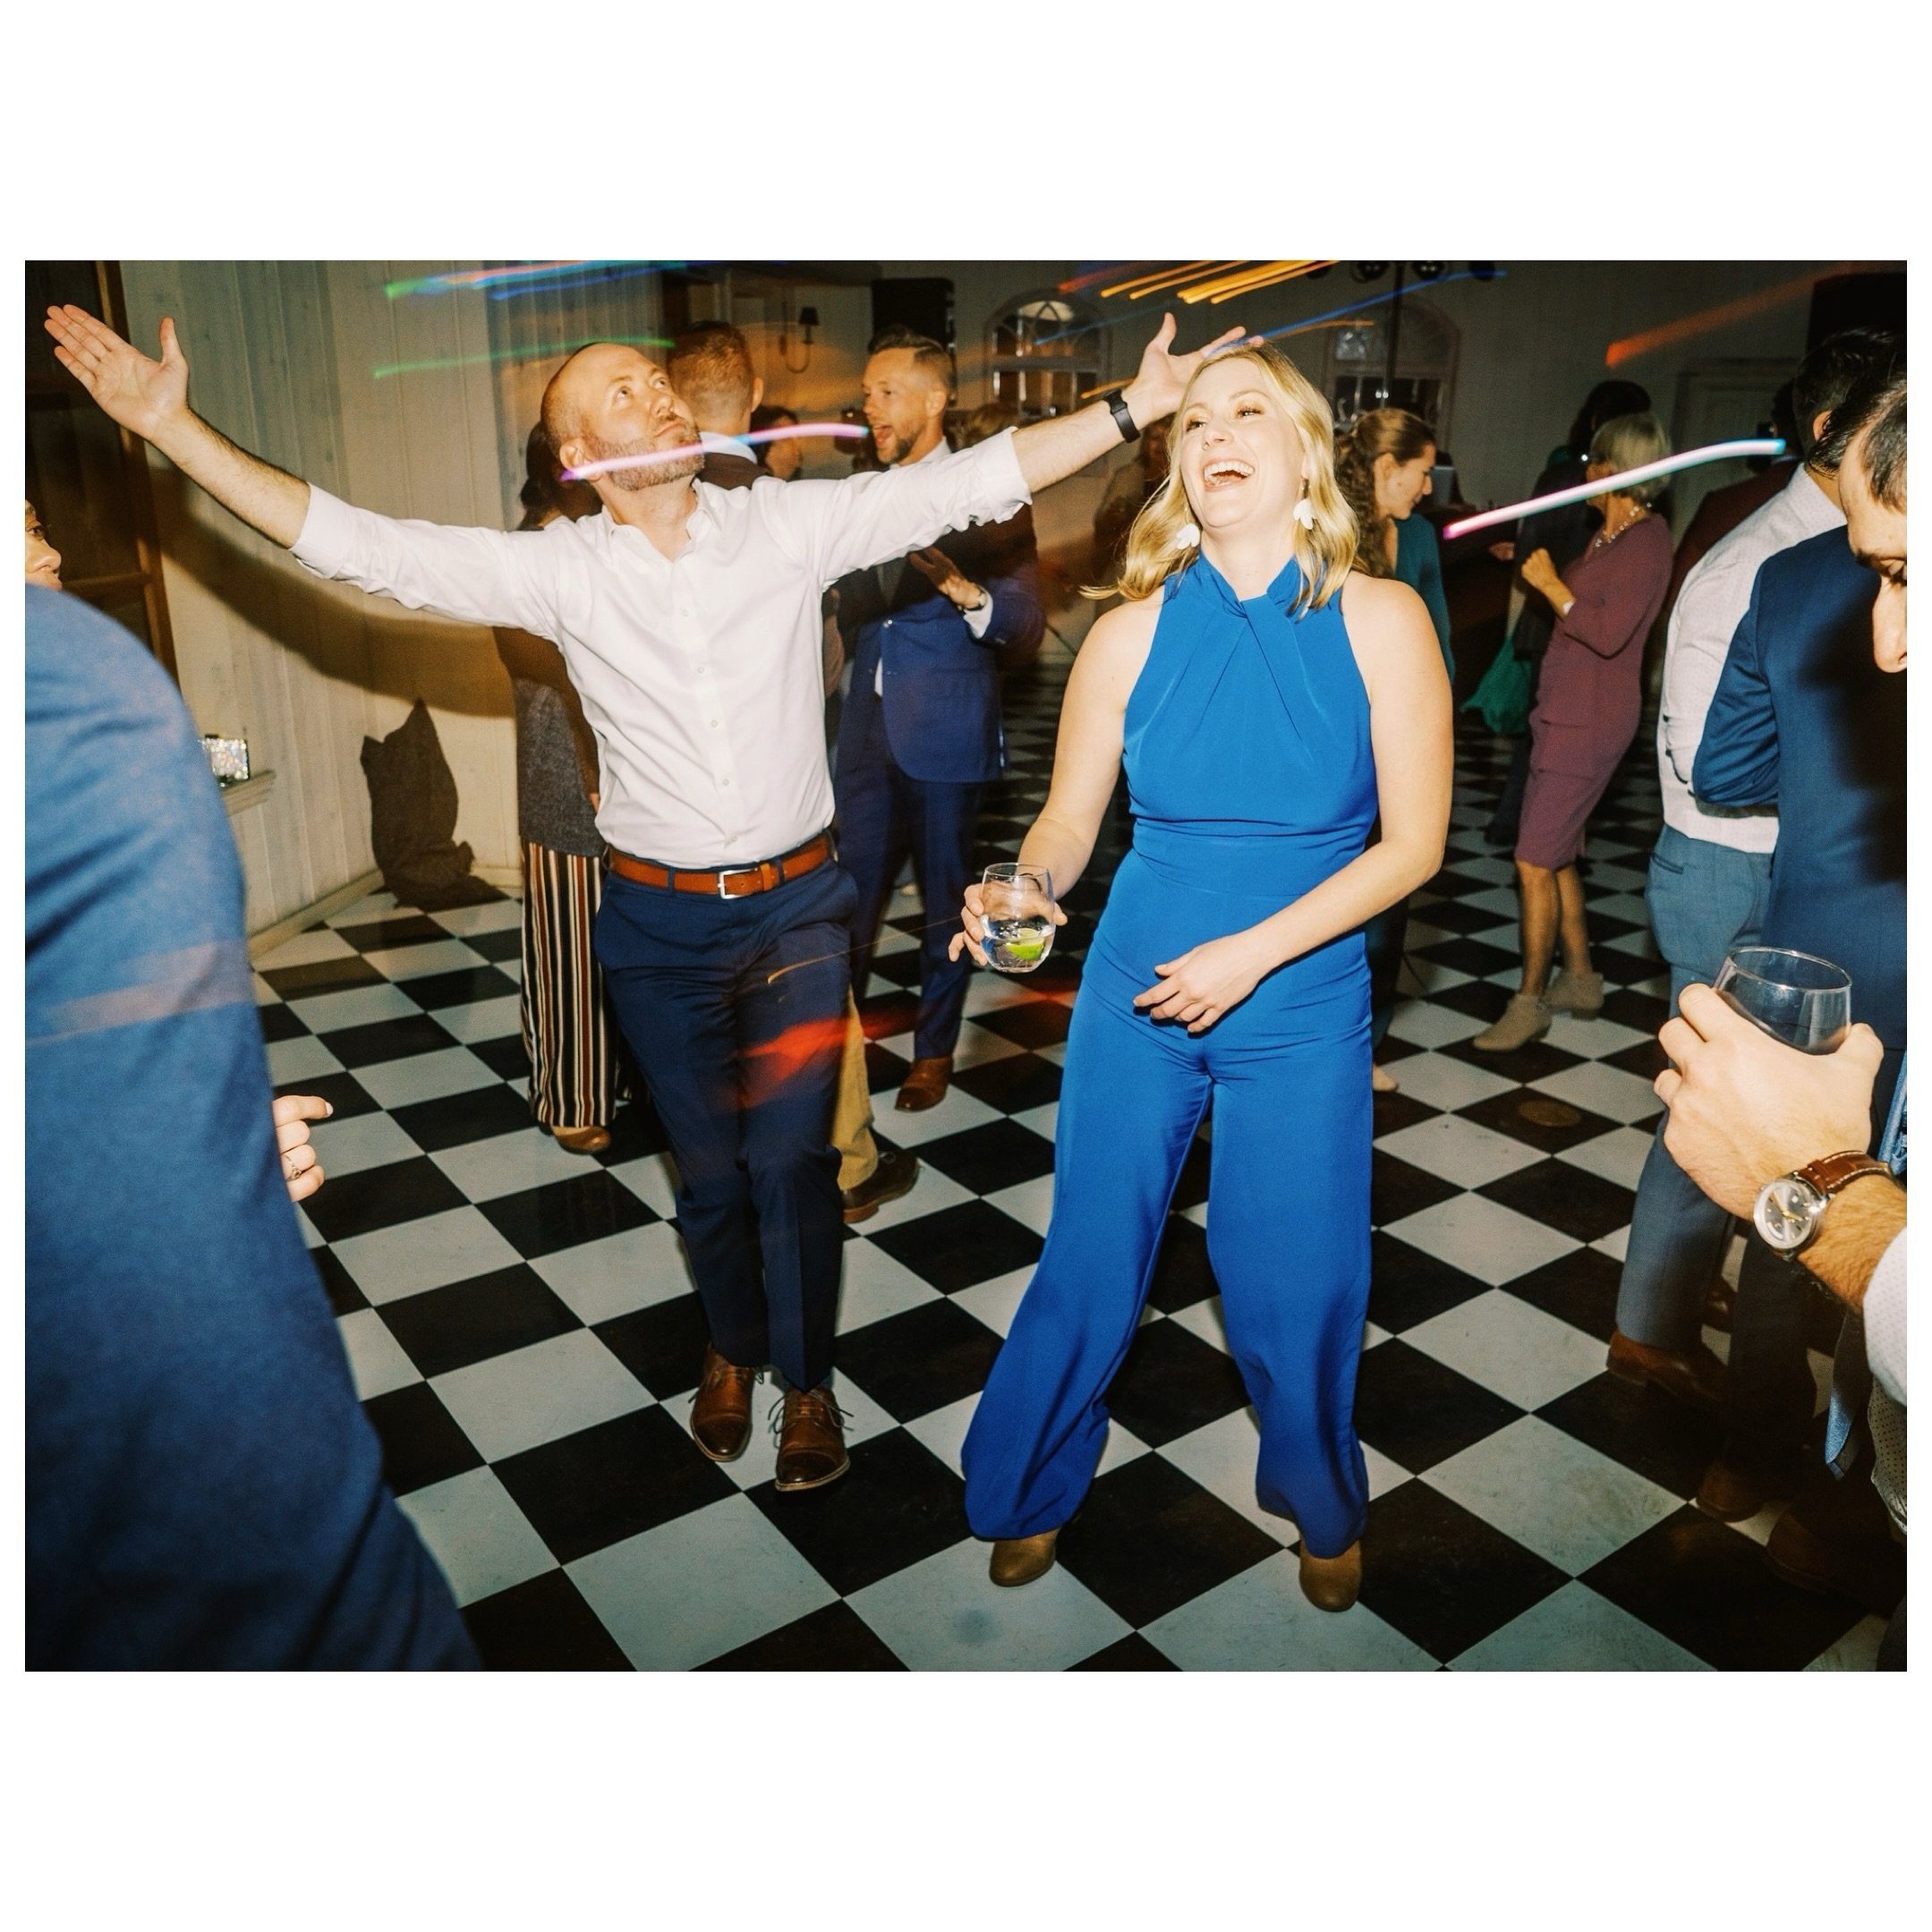 The dance party at weddings is one of my favorite parts of the day ✨